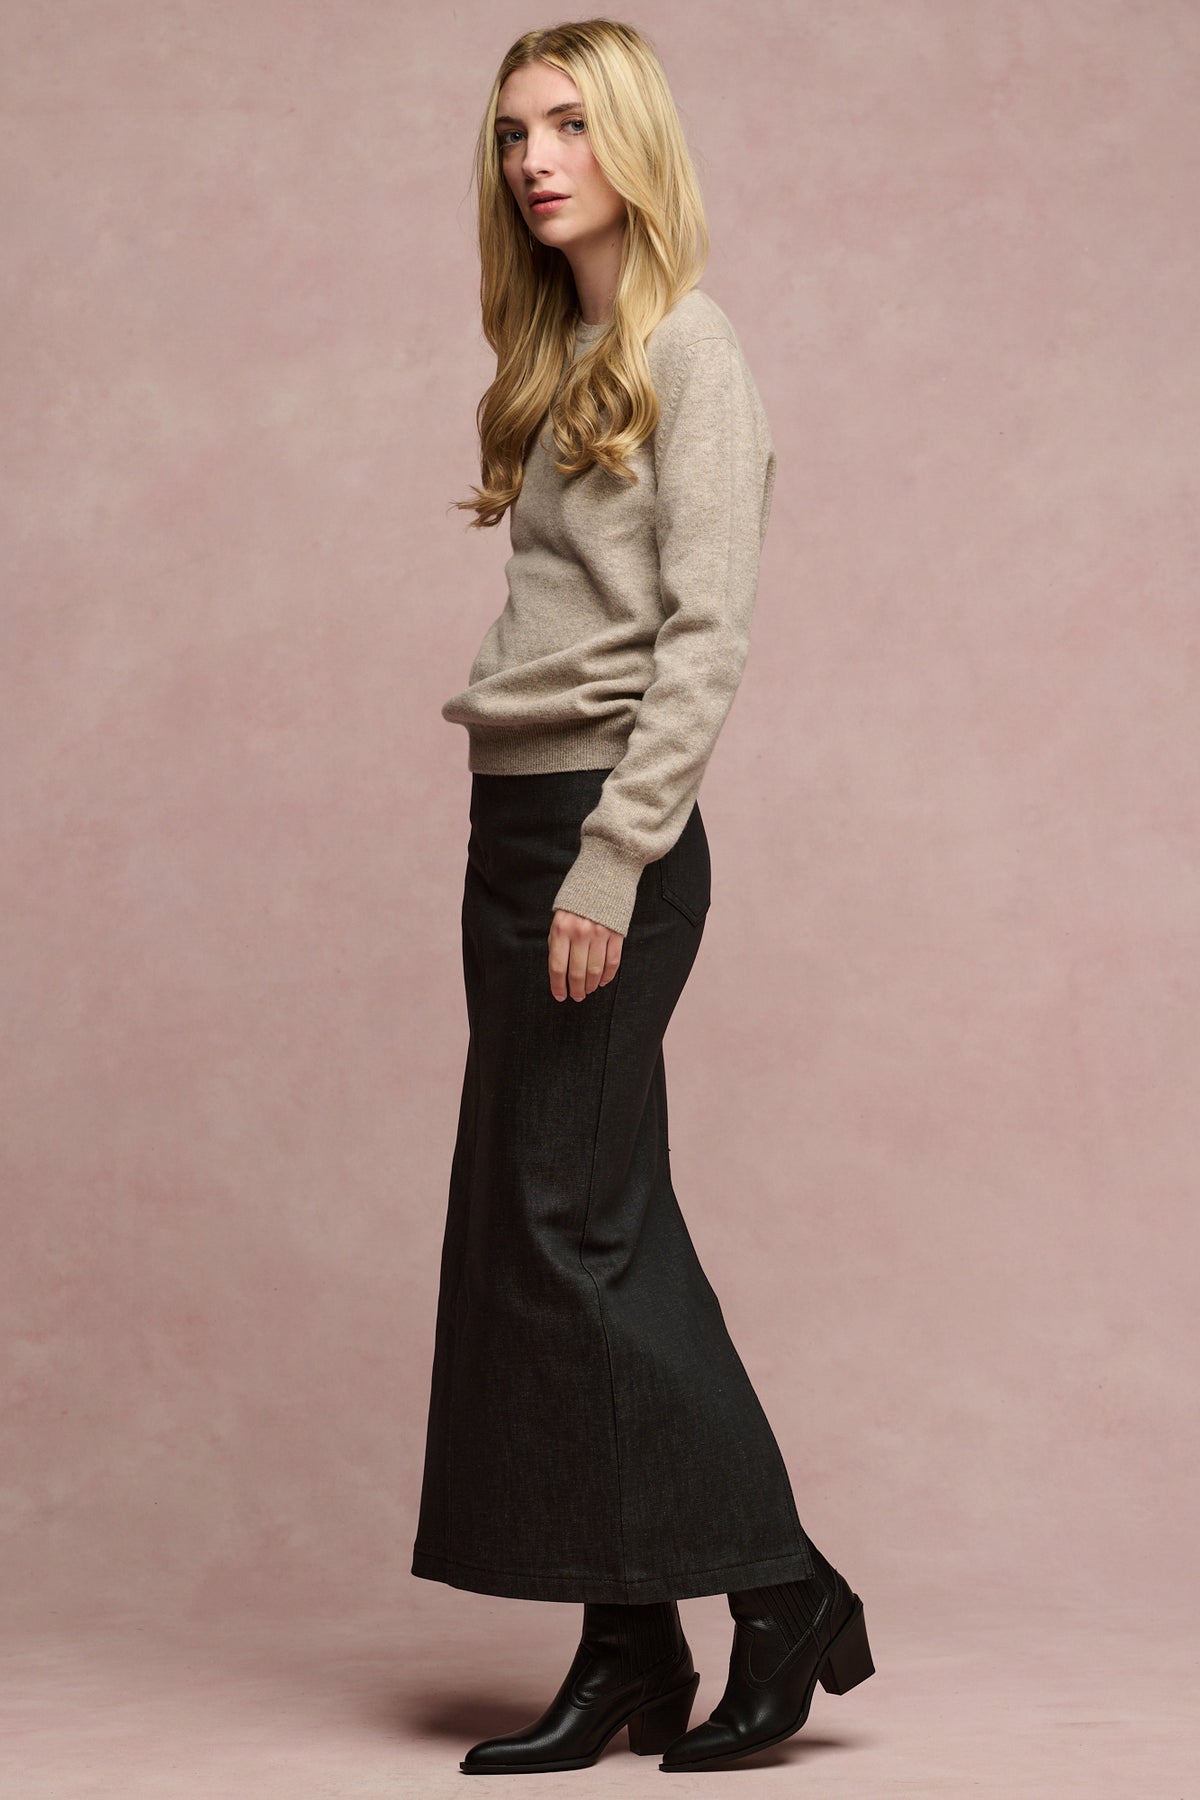 
            The side of female wearing Frankie denim maxi skirt in black paired with lambswool jumper and black boots